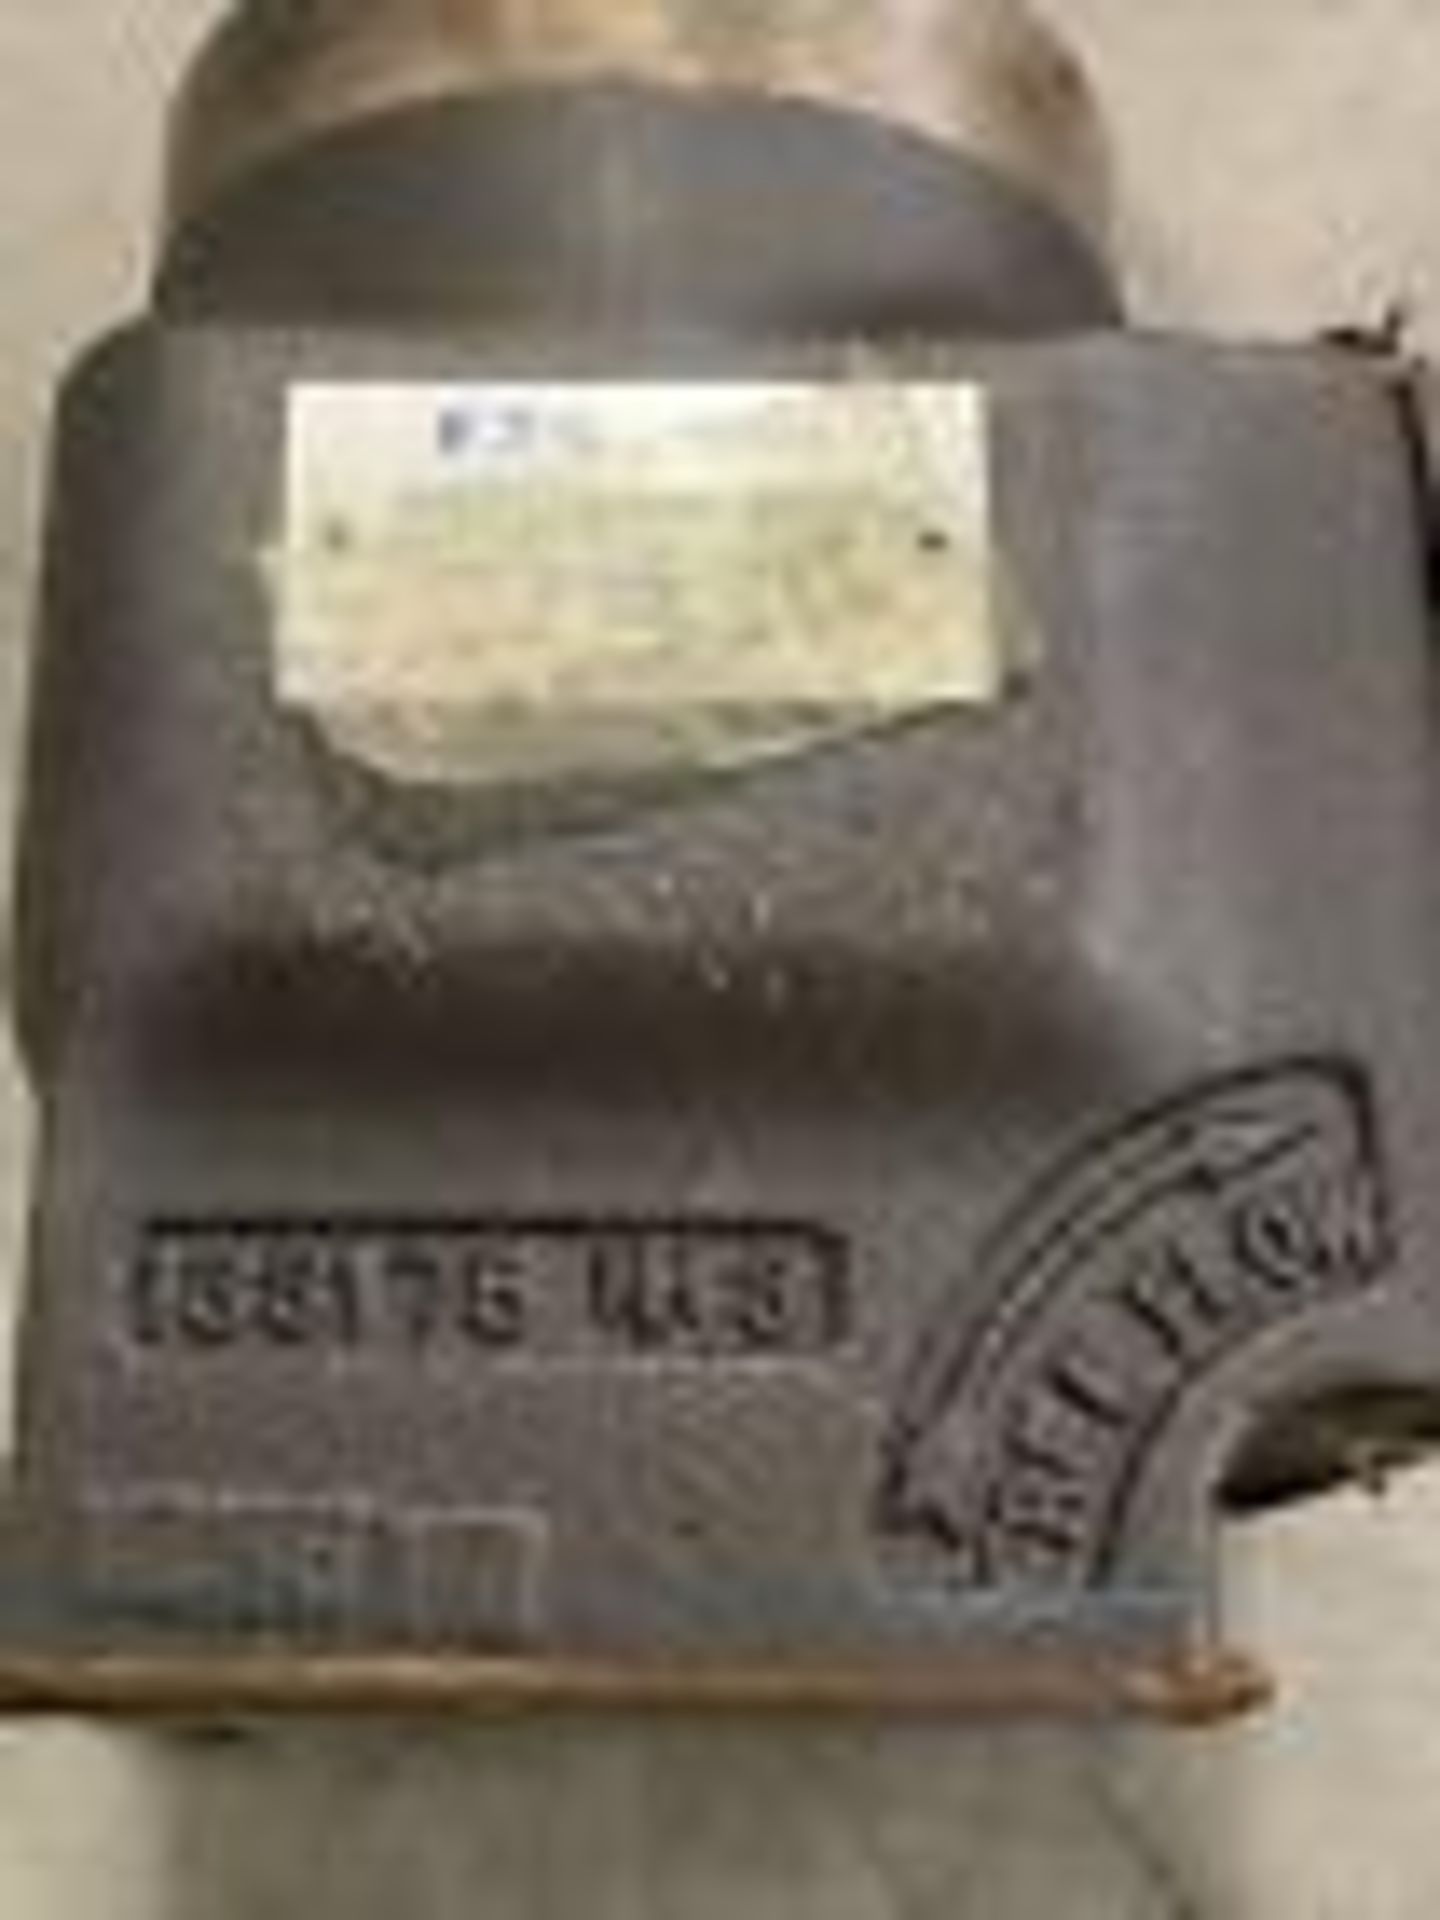 EATON VICKERS F3 DF10P1 16 5 20 DIRECTIONAL CHECK VALVE - Image 9 of 11